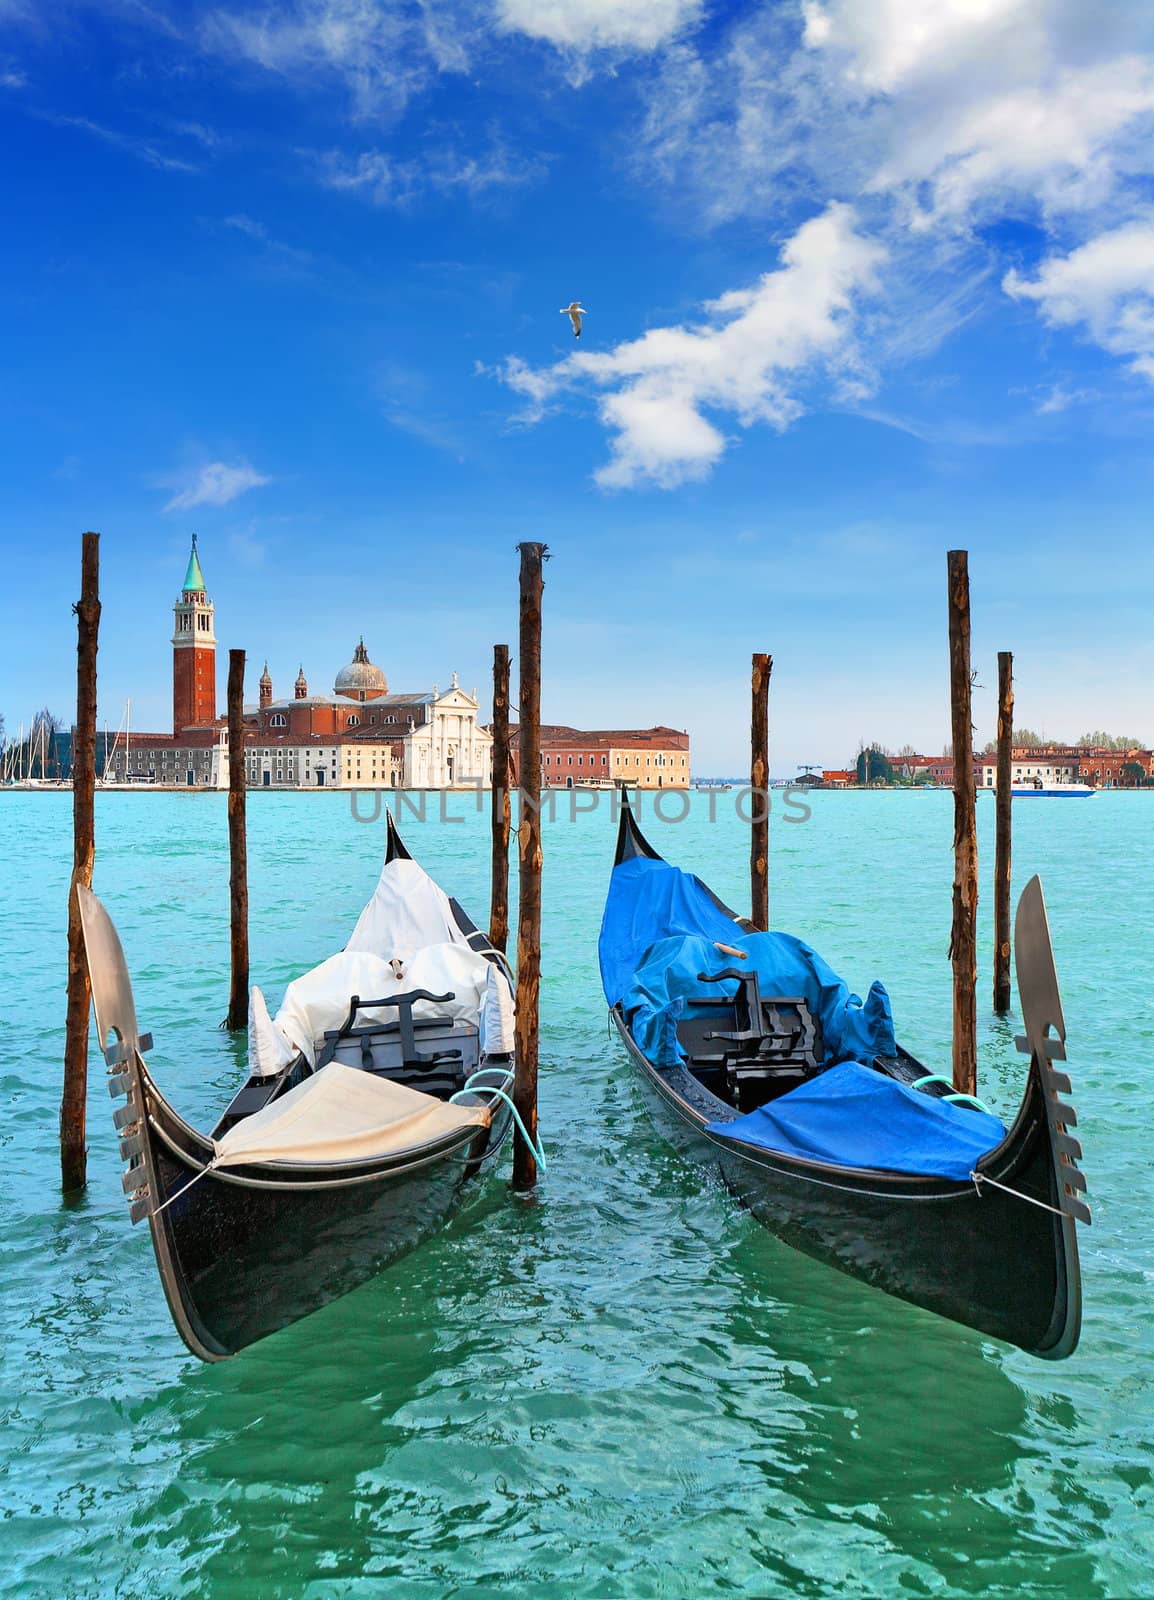  Gondolas. Venetian Lagoon. San Giorgio Maggiore. Venice. Venice is a city in northeast Italy which is renowned for the beauty of its setting, its architecture and its artworks. It is the capital of the Veneto region.